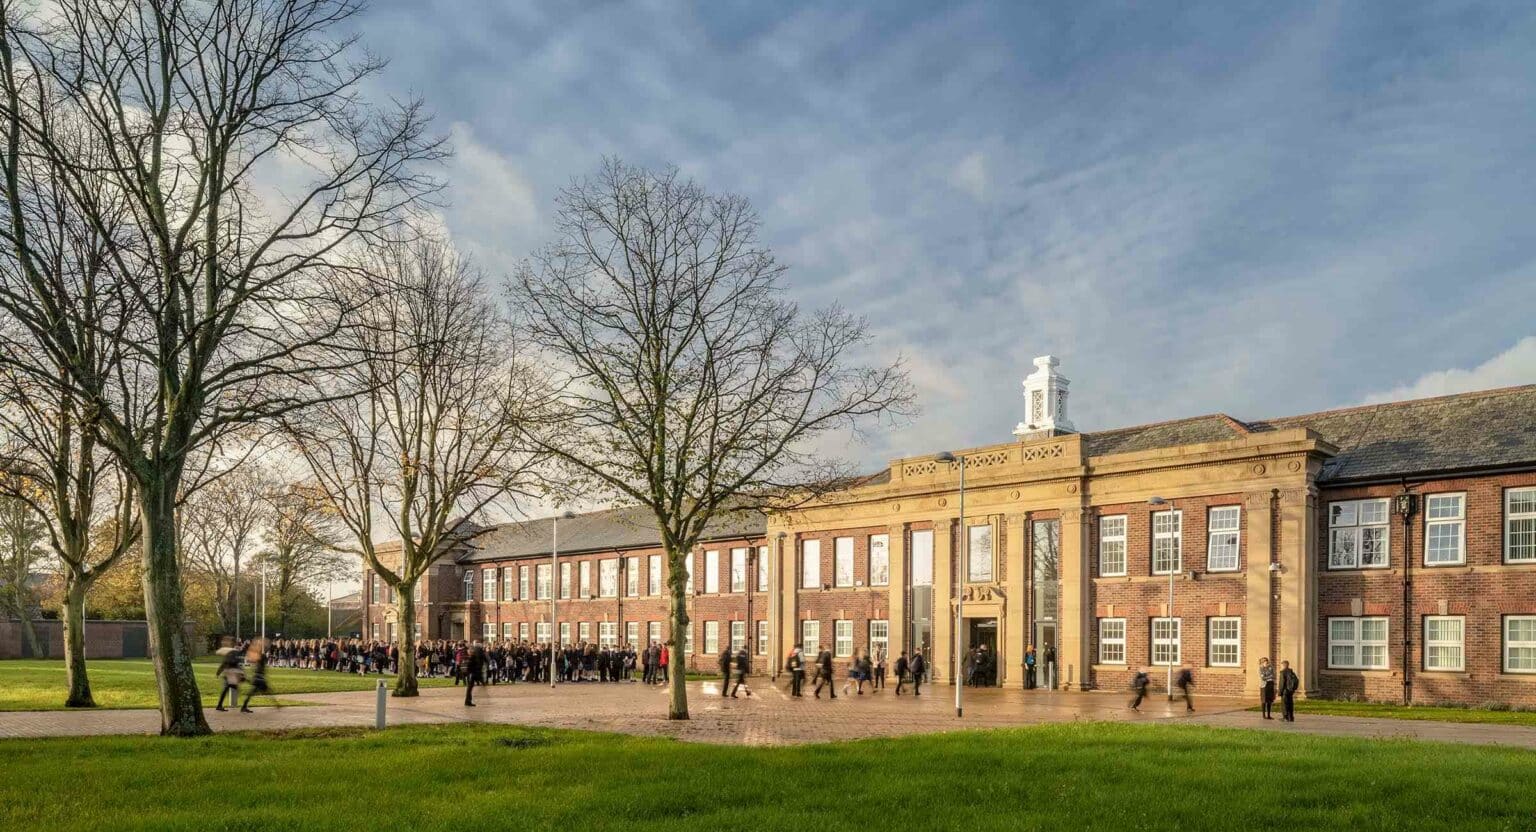 Integrated surveillance solutions enhance site security at UK schools